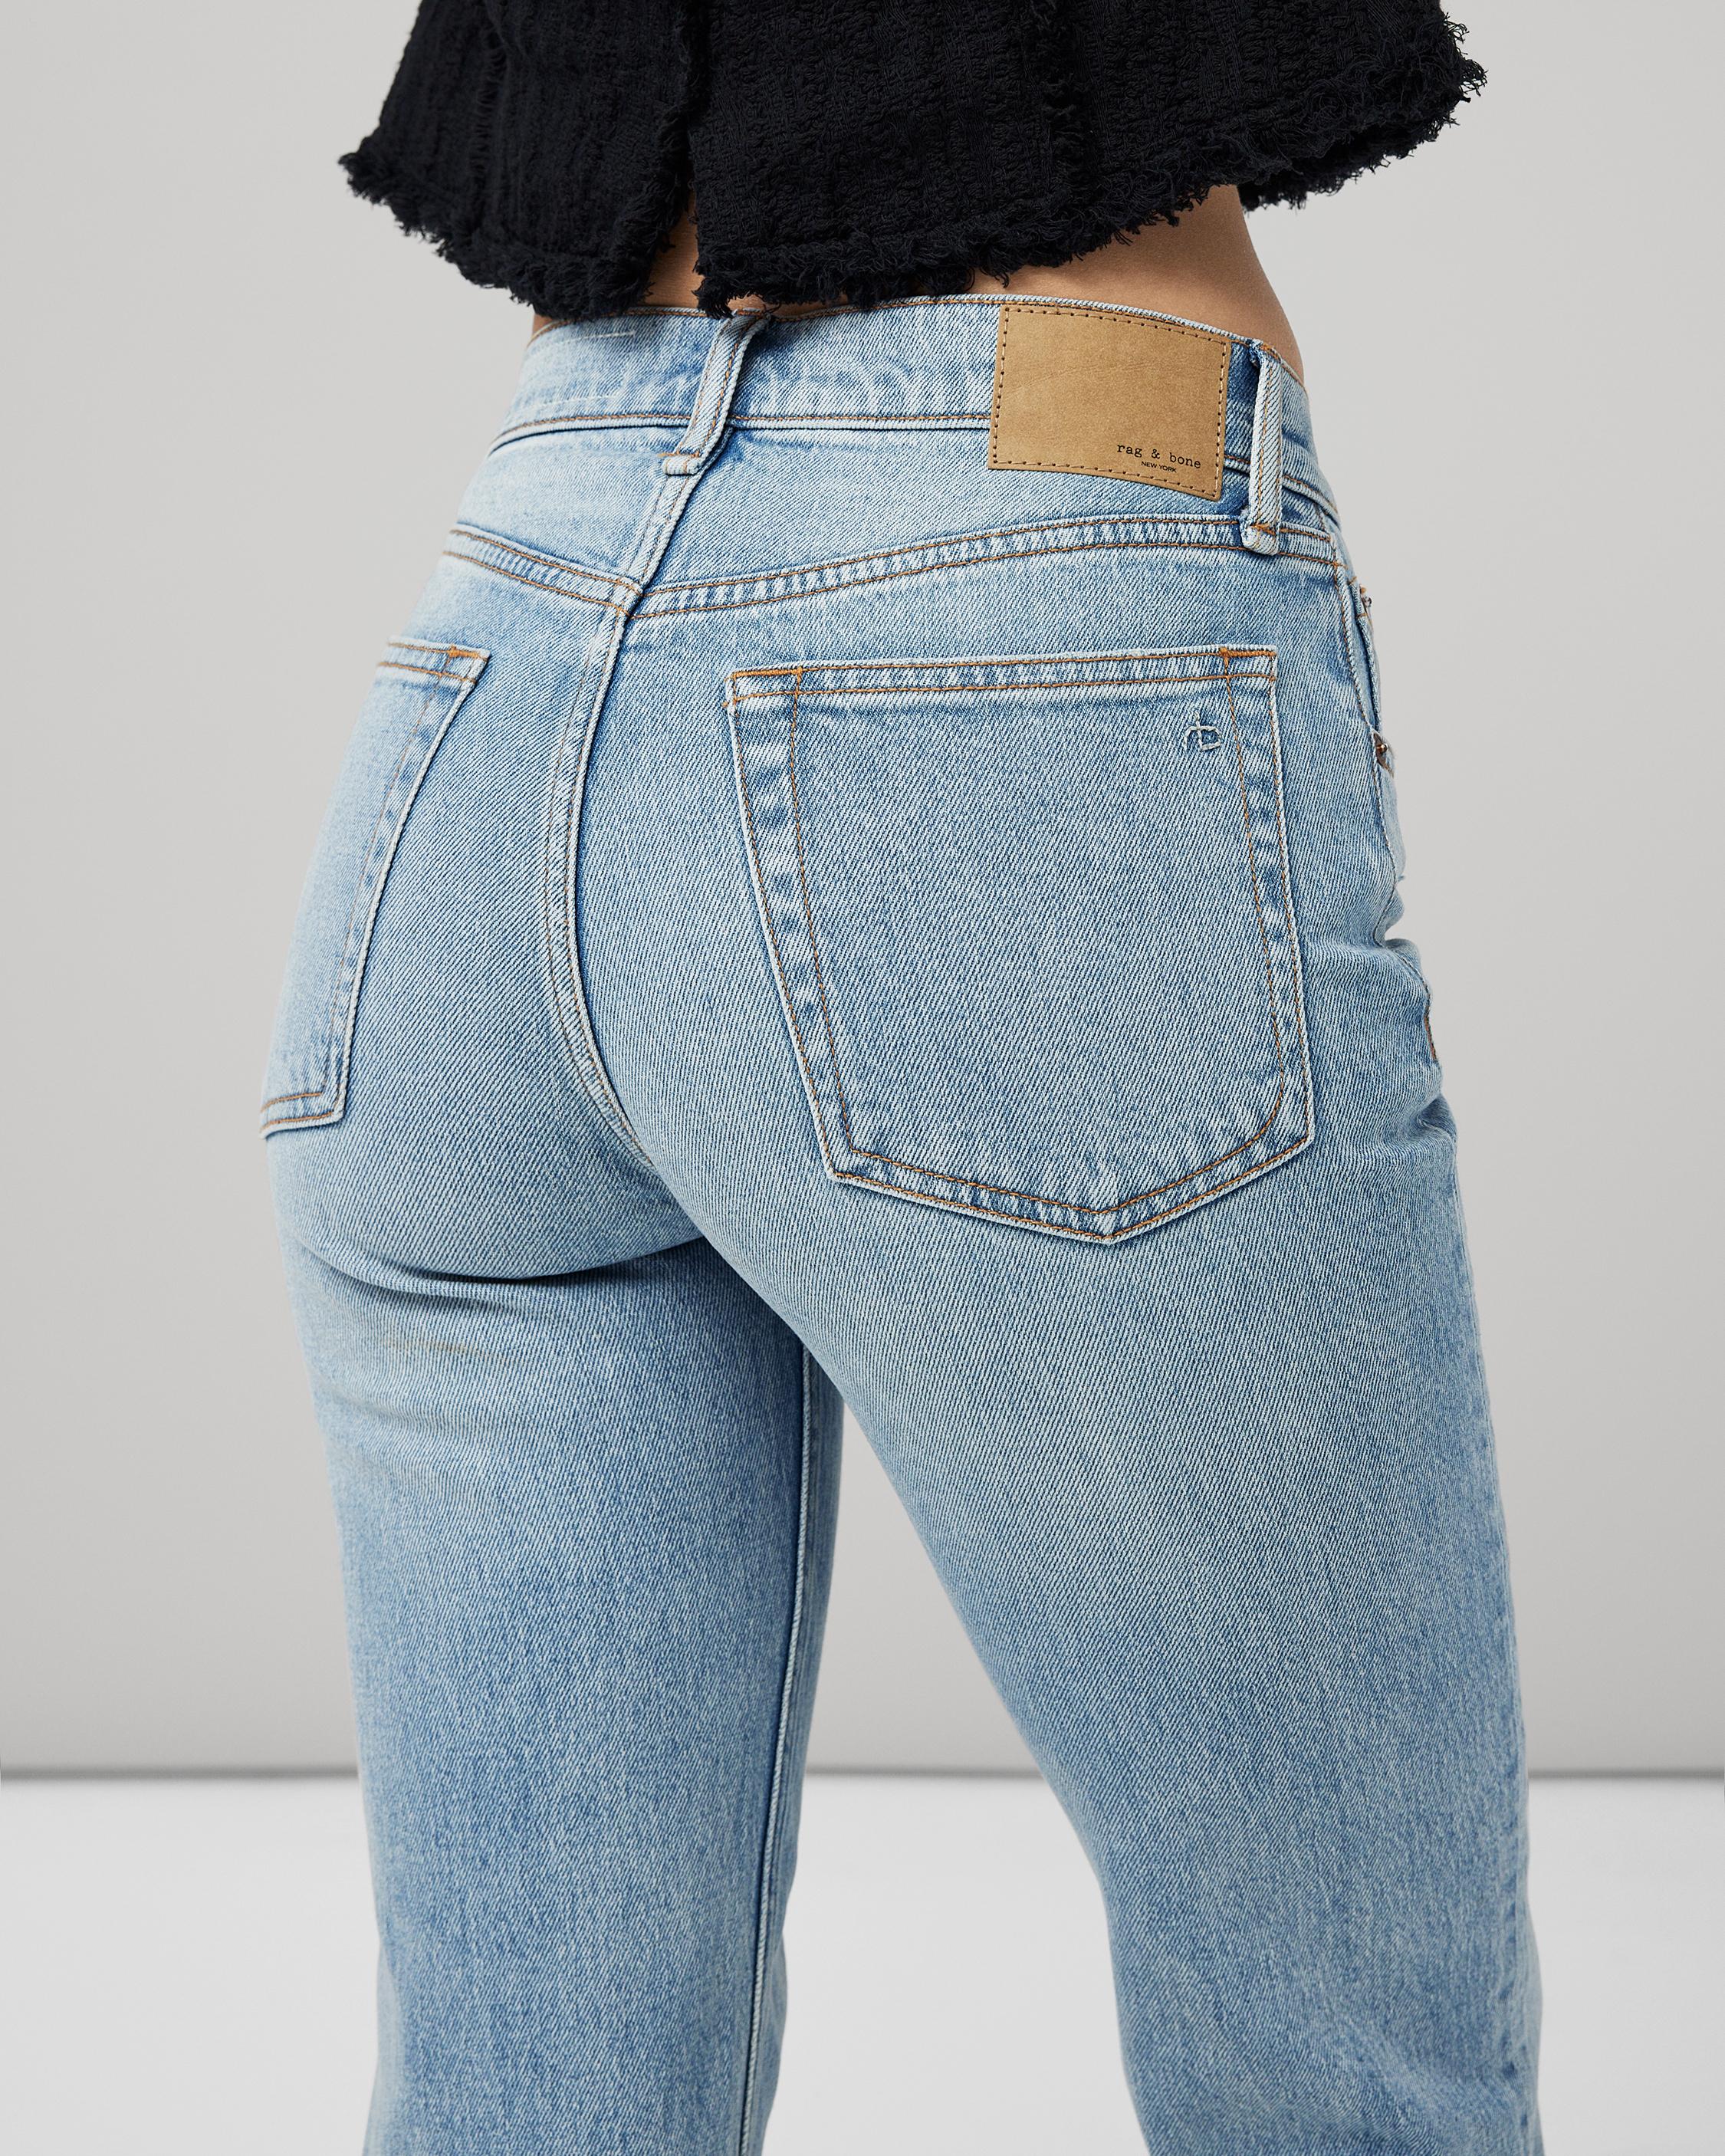 Harlow Relaxed Straight Leg Jeans